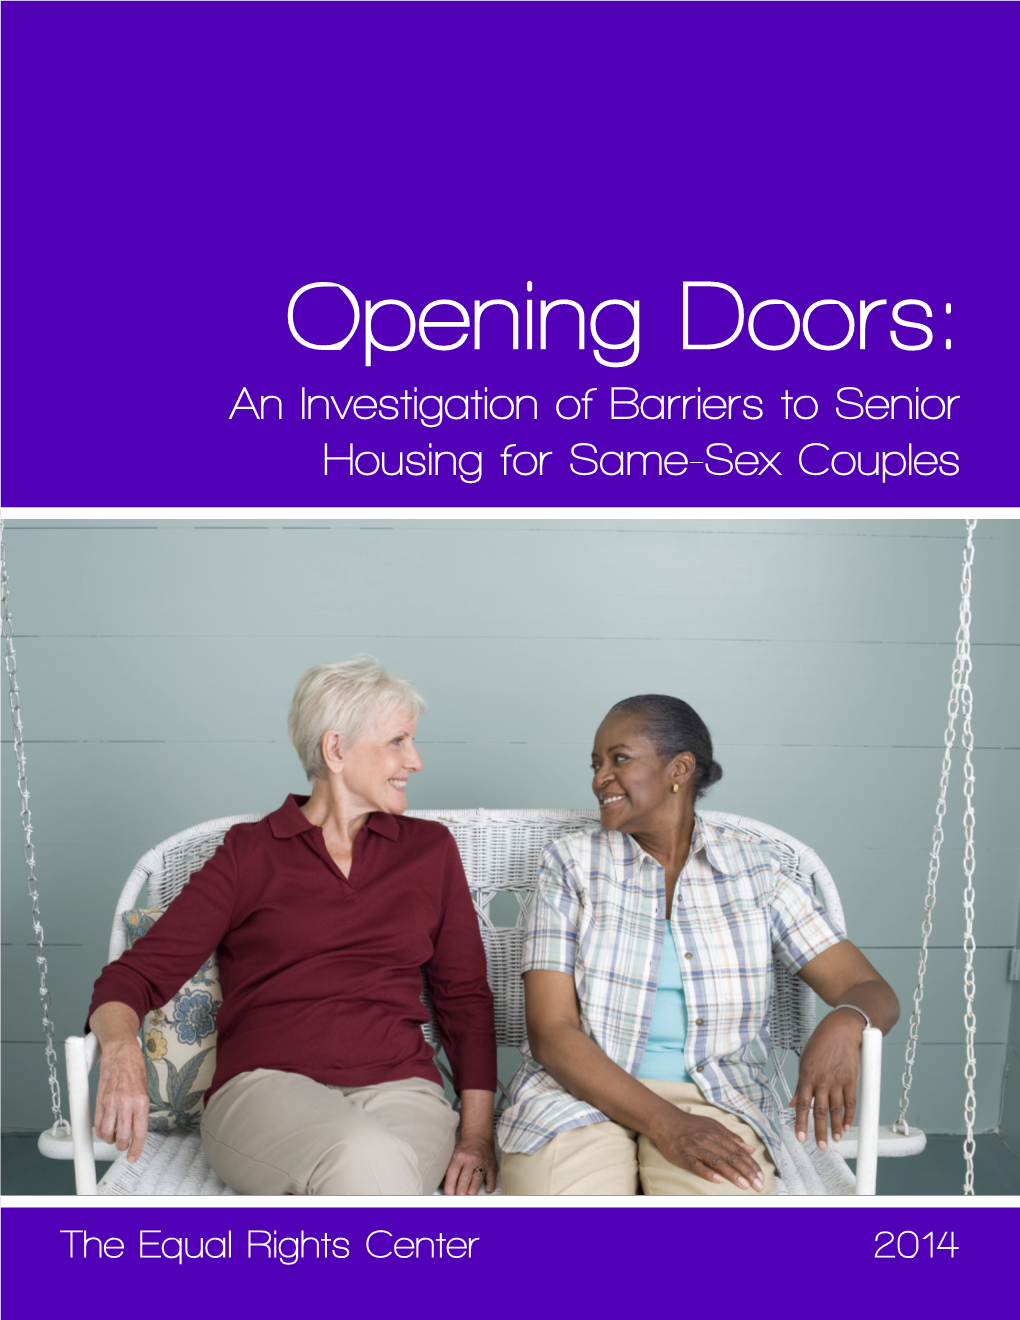 Opening Doors: an Investigation of Barriers to Senior Housing for Same-Sex Couples